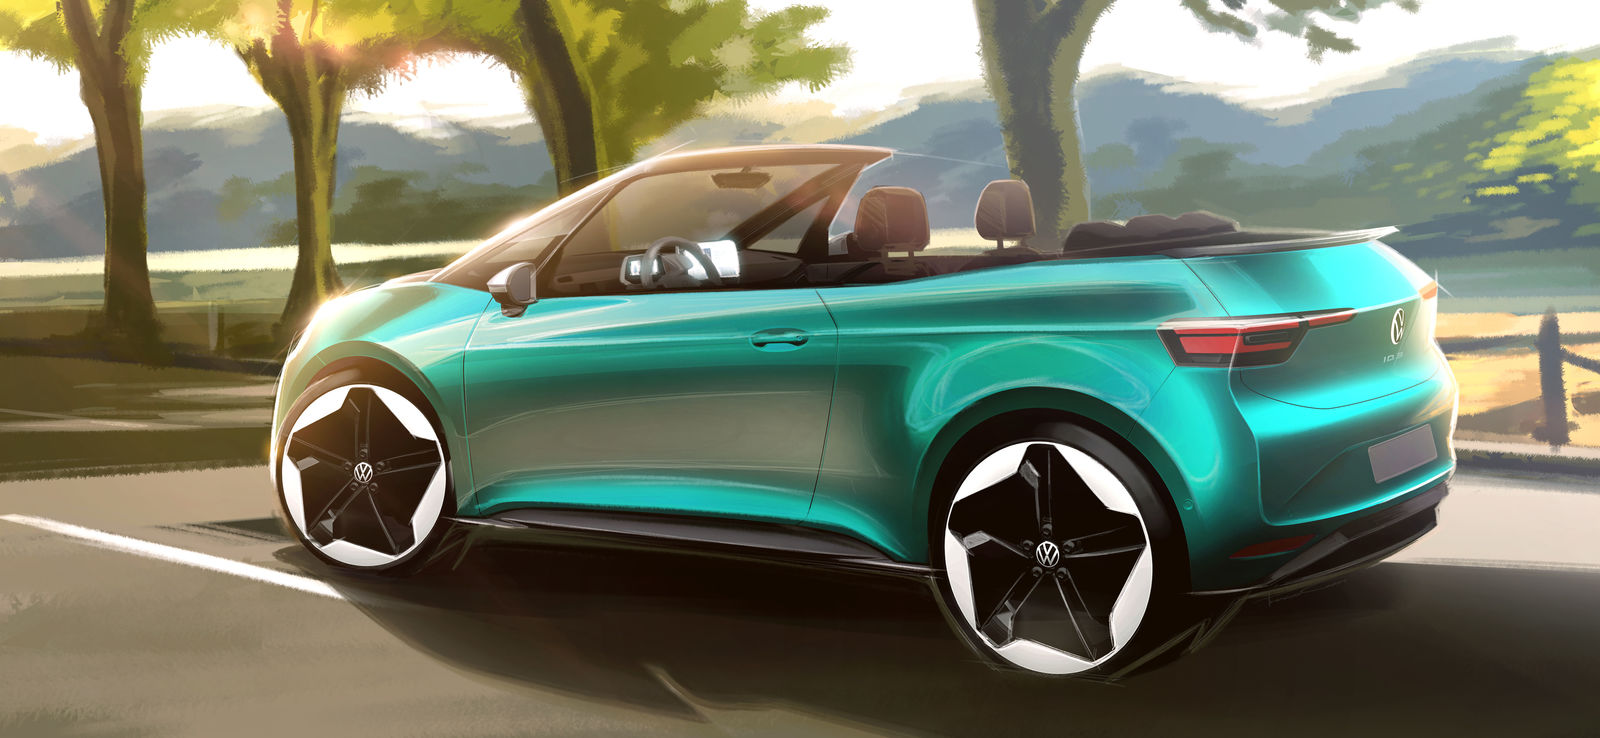 EV convertible? What is your opinion?